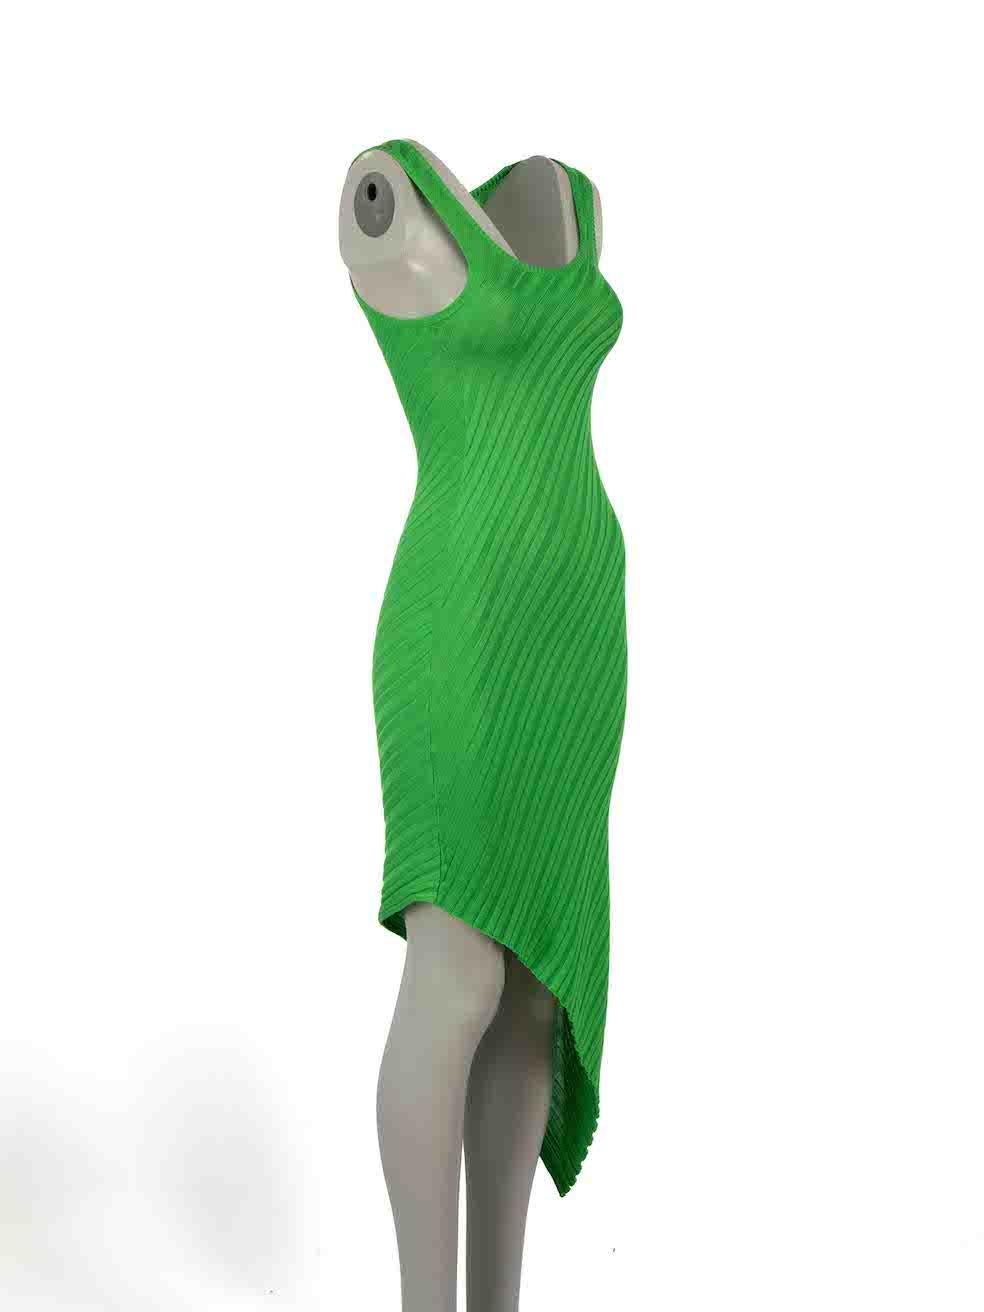 CONDITION is Very good. Hardly any visible wear to dress is evident on this used Petar Petrov designer resale item.
 
Details
Resort Spring 2022
Green
Silk
Midi
Asymmetric accent
Knitted and stretchy
Round neckline
 
Made in Slovenia
